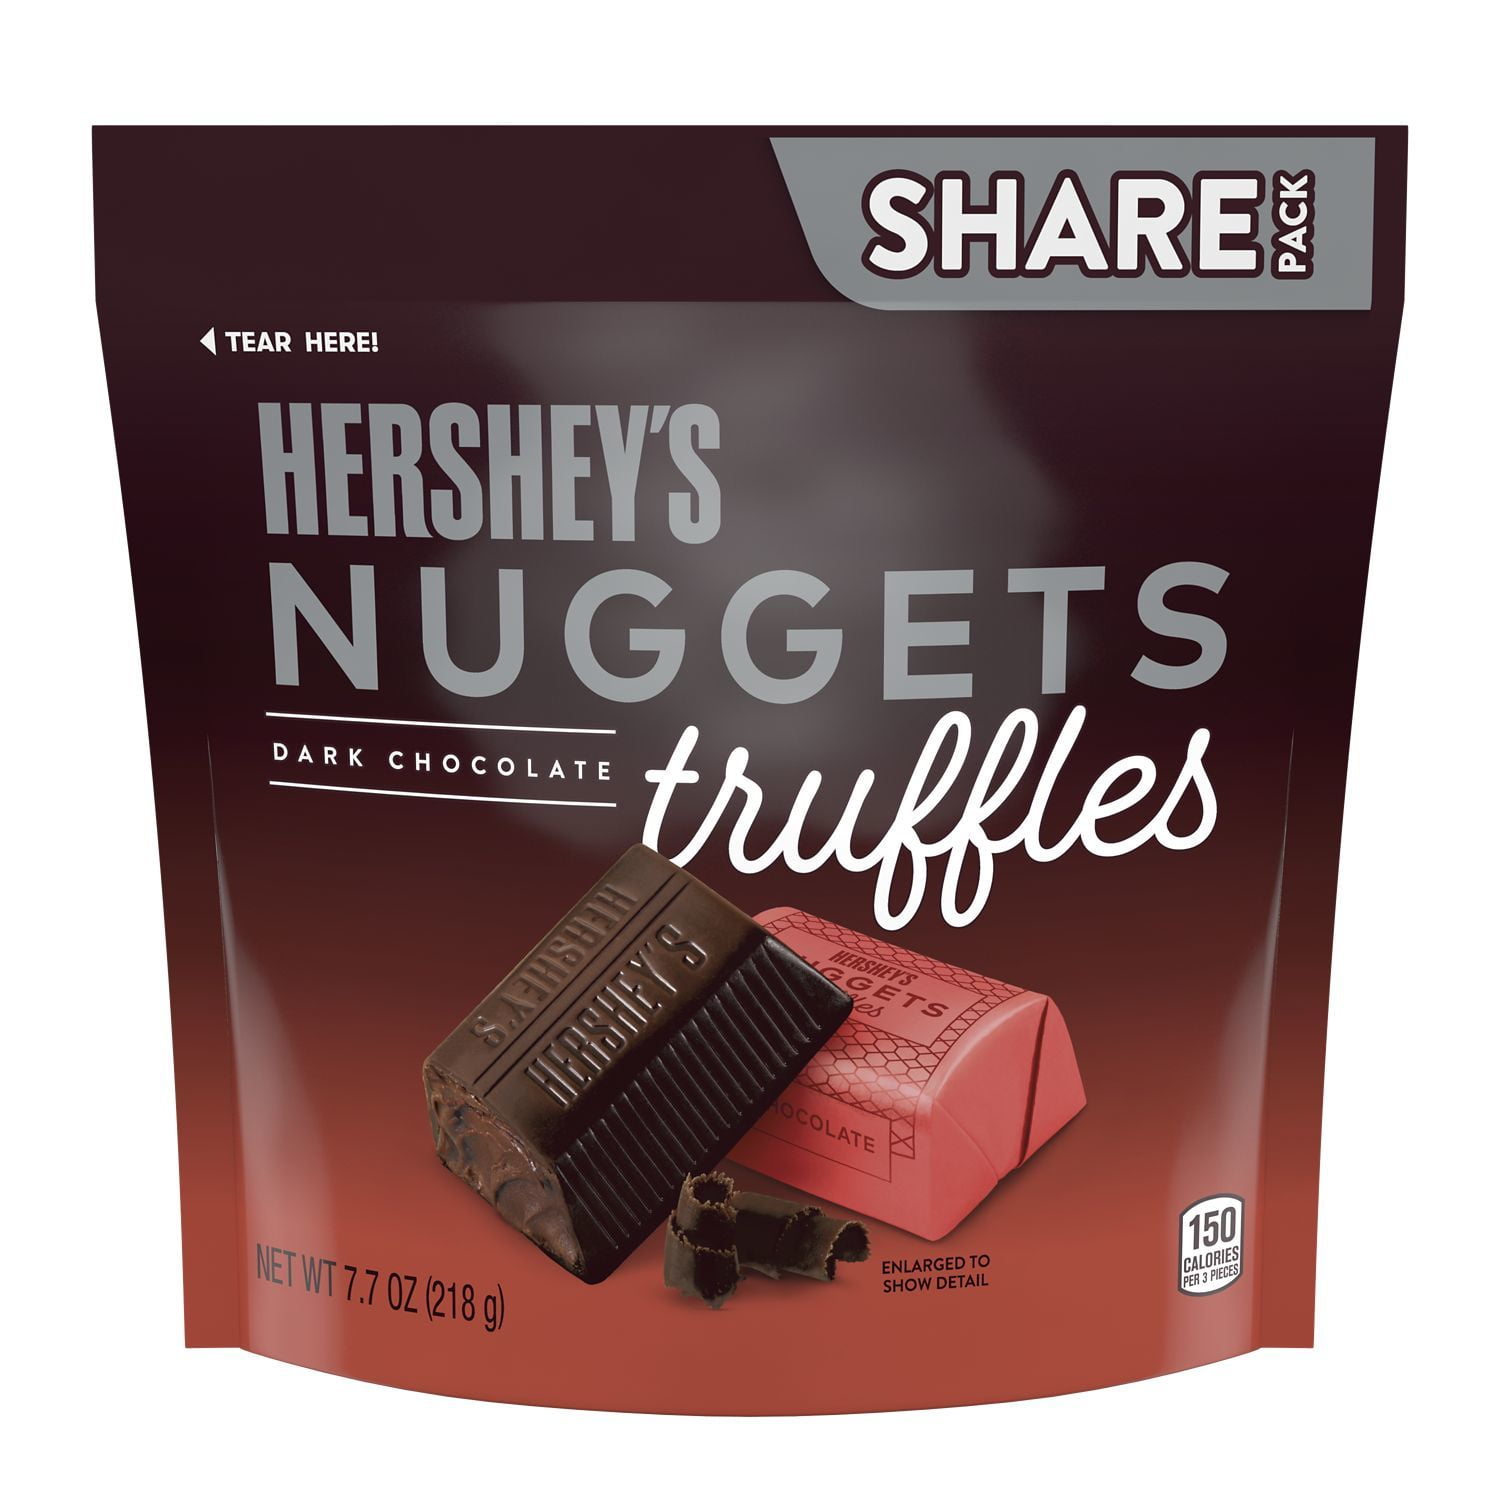 Hershey's, Nuggets Dark Chocolate Truffles Candy, Individually Wrapped, 7.7 oz, Share Pack